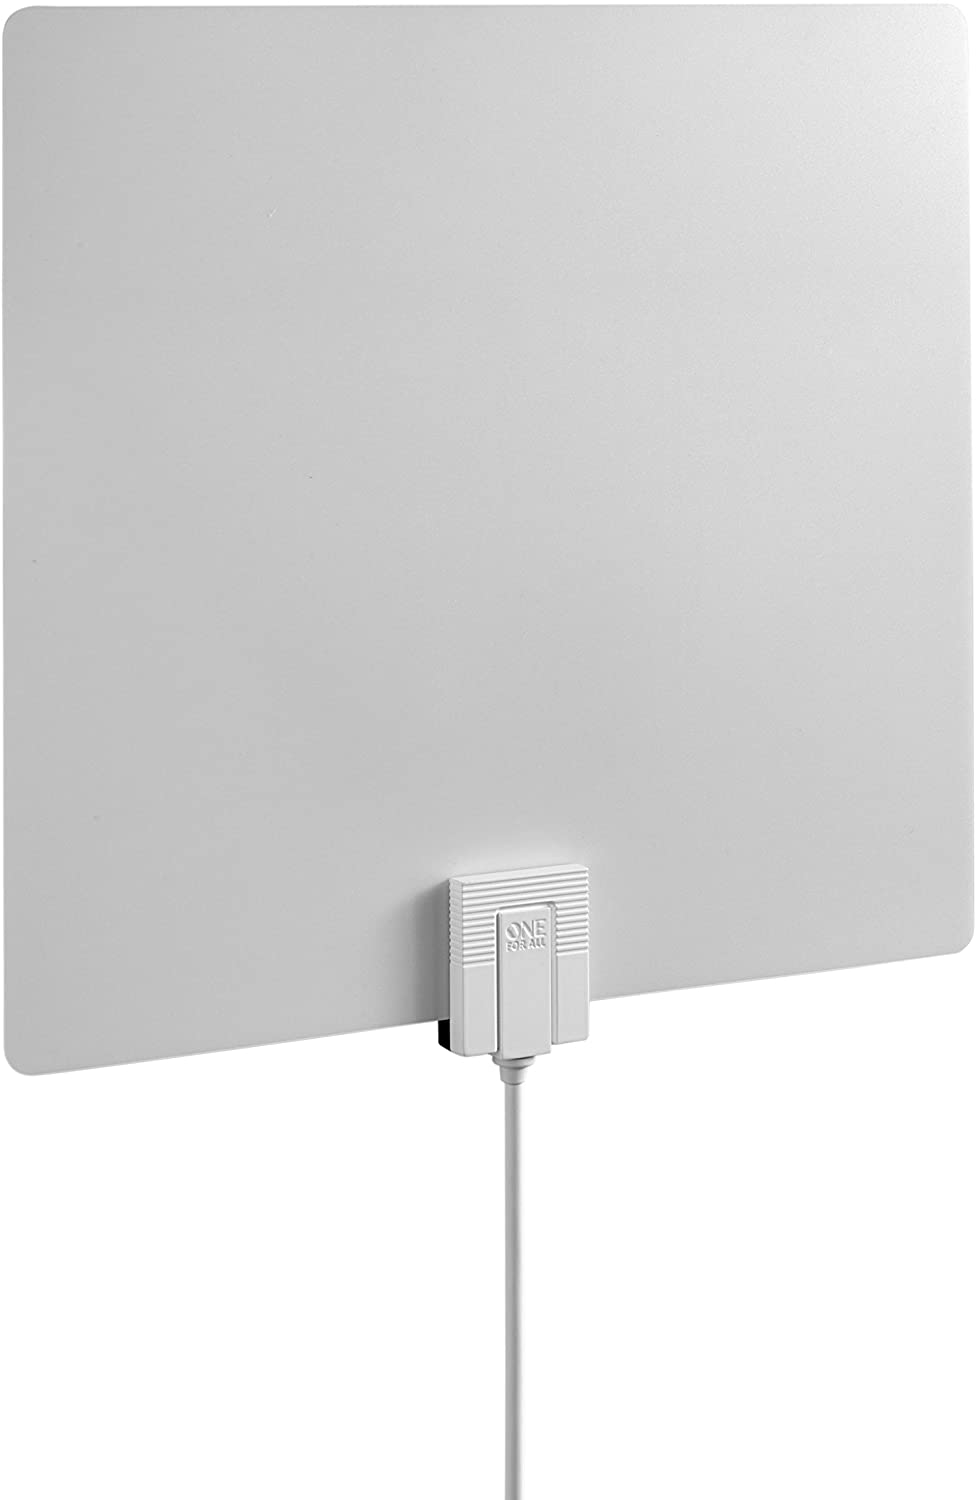 Trágico Cap Centelleo One For All U14541 Amplified HDTV 4K Antenna Over the Air TV Channels-  White - Deal Parade